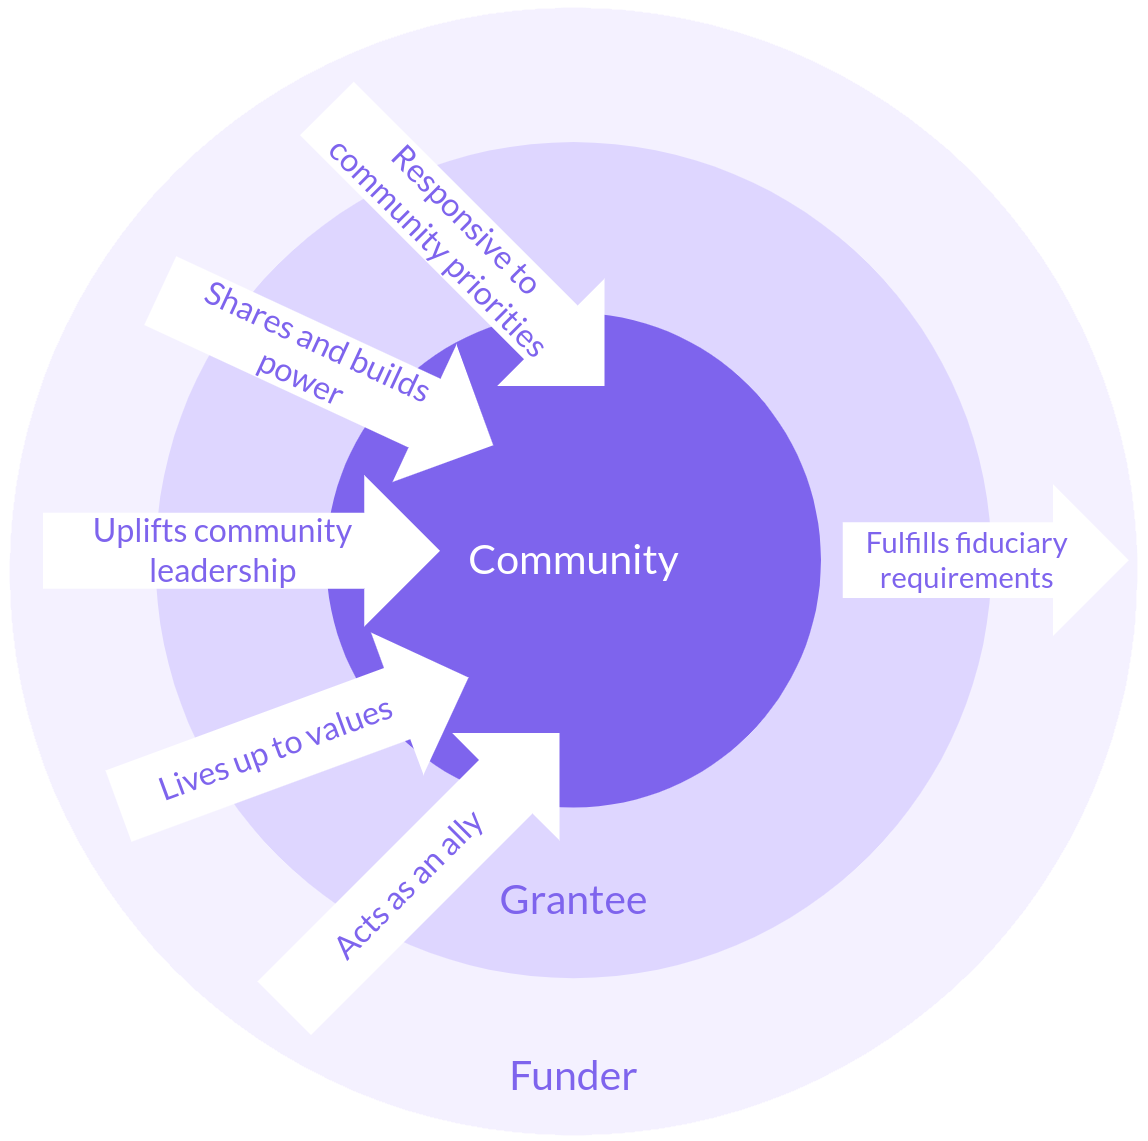 Funder is accountable to the community: Responsive to community priorities, Shares and builds power, Uplifts community leadership, Lives up to values, Acts as an ally. Grantee is accountable to Funder: Fulfills fiduciary requirements